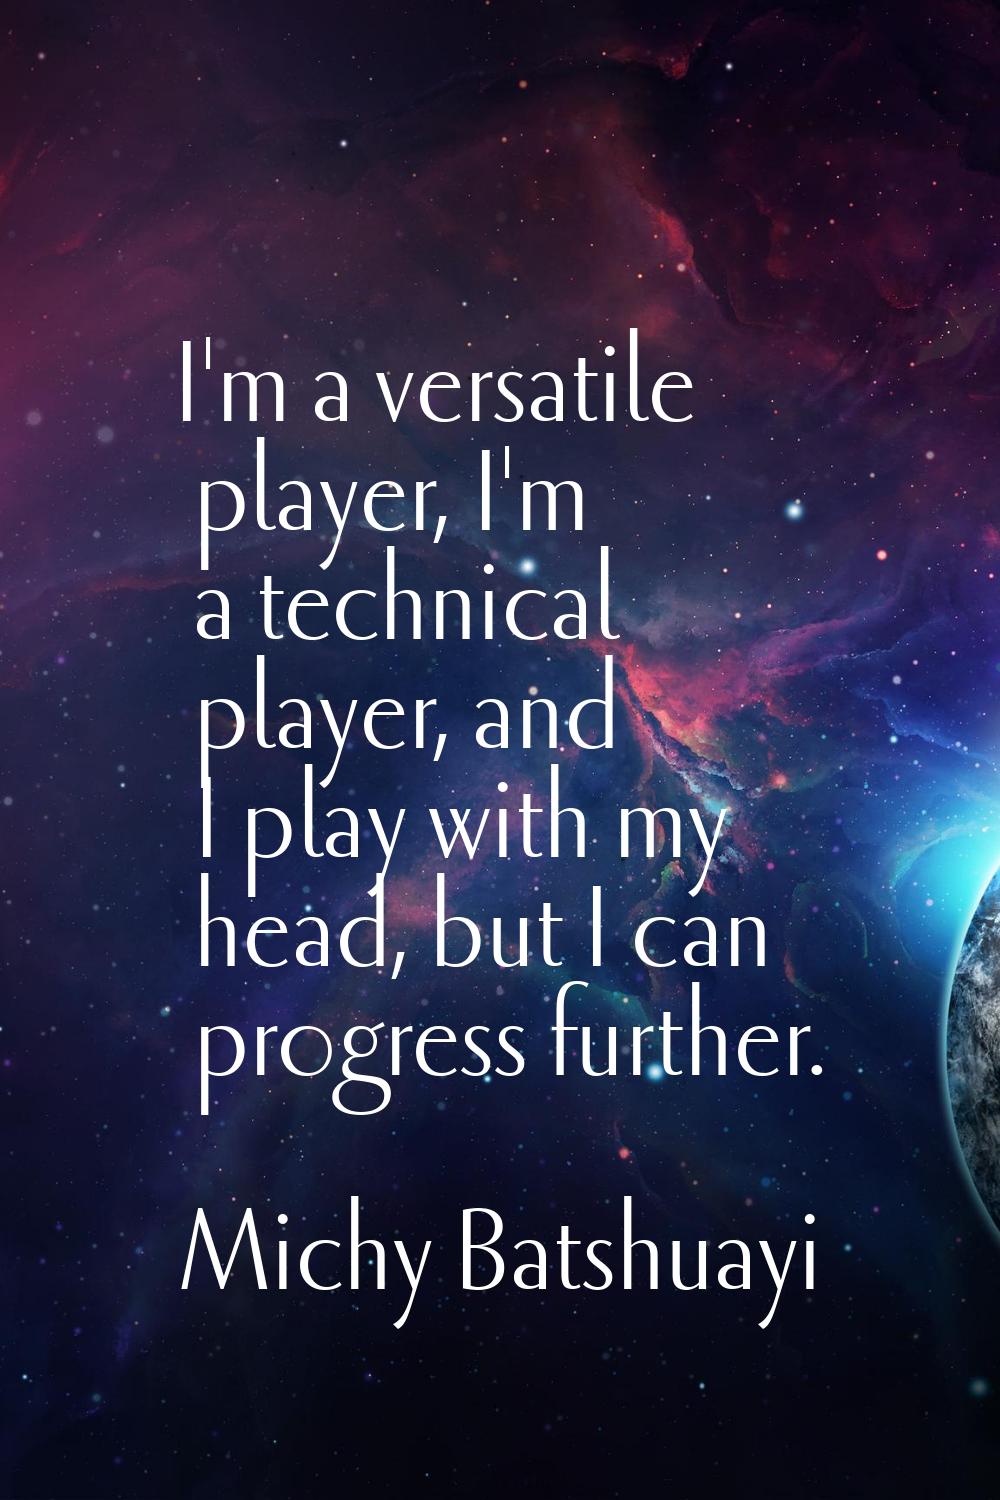 I'm a versatile player, I'm a technical player, and I play with my head, but I can progress further